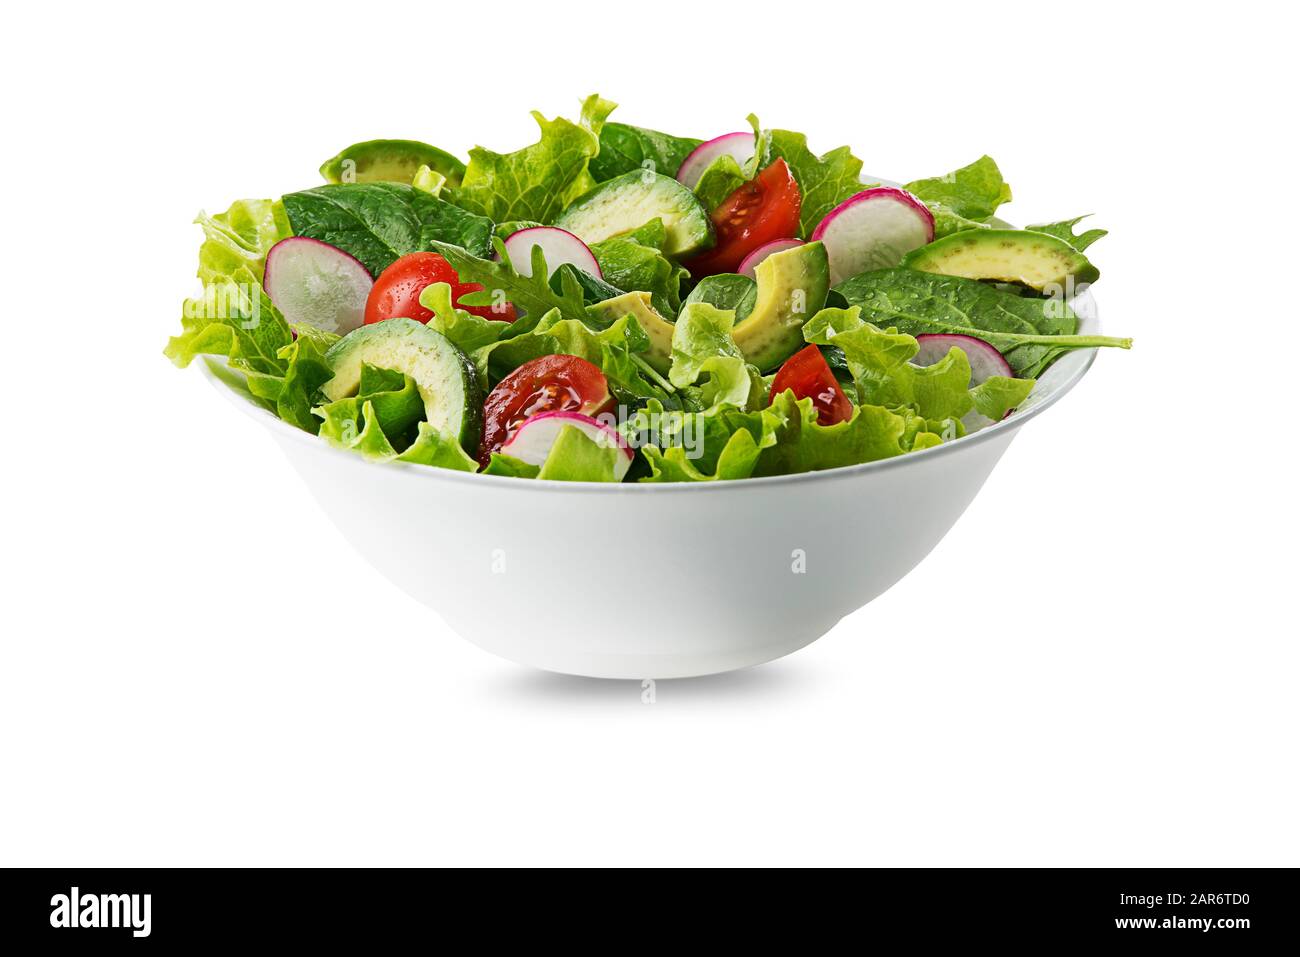 Green salad with avocado, tomato and fresh vegetables isolated on white background Stock Photo